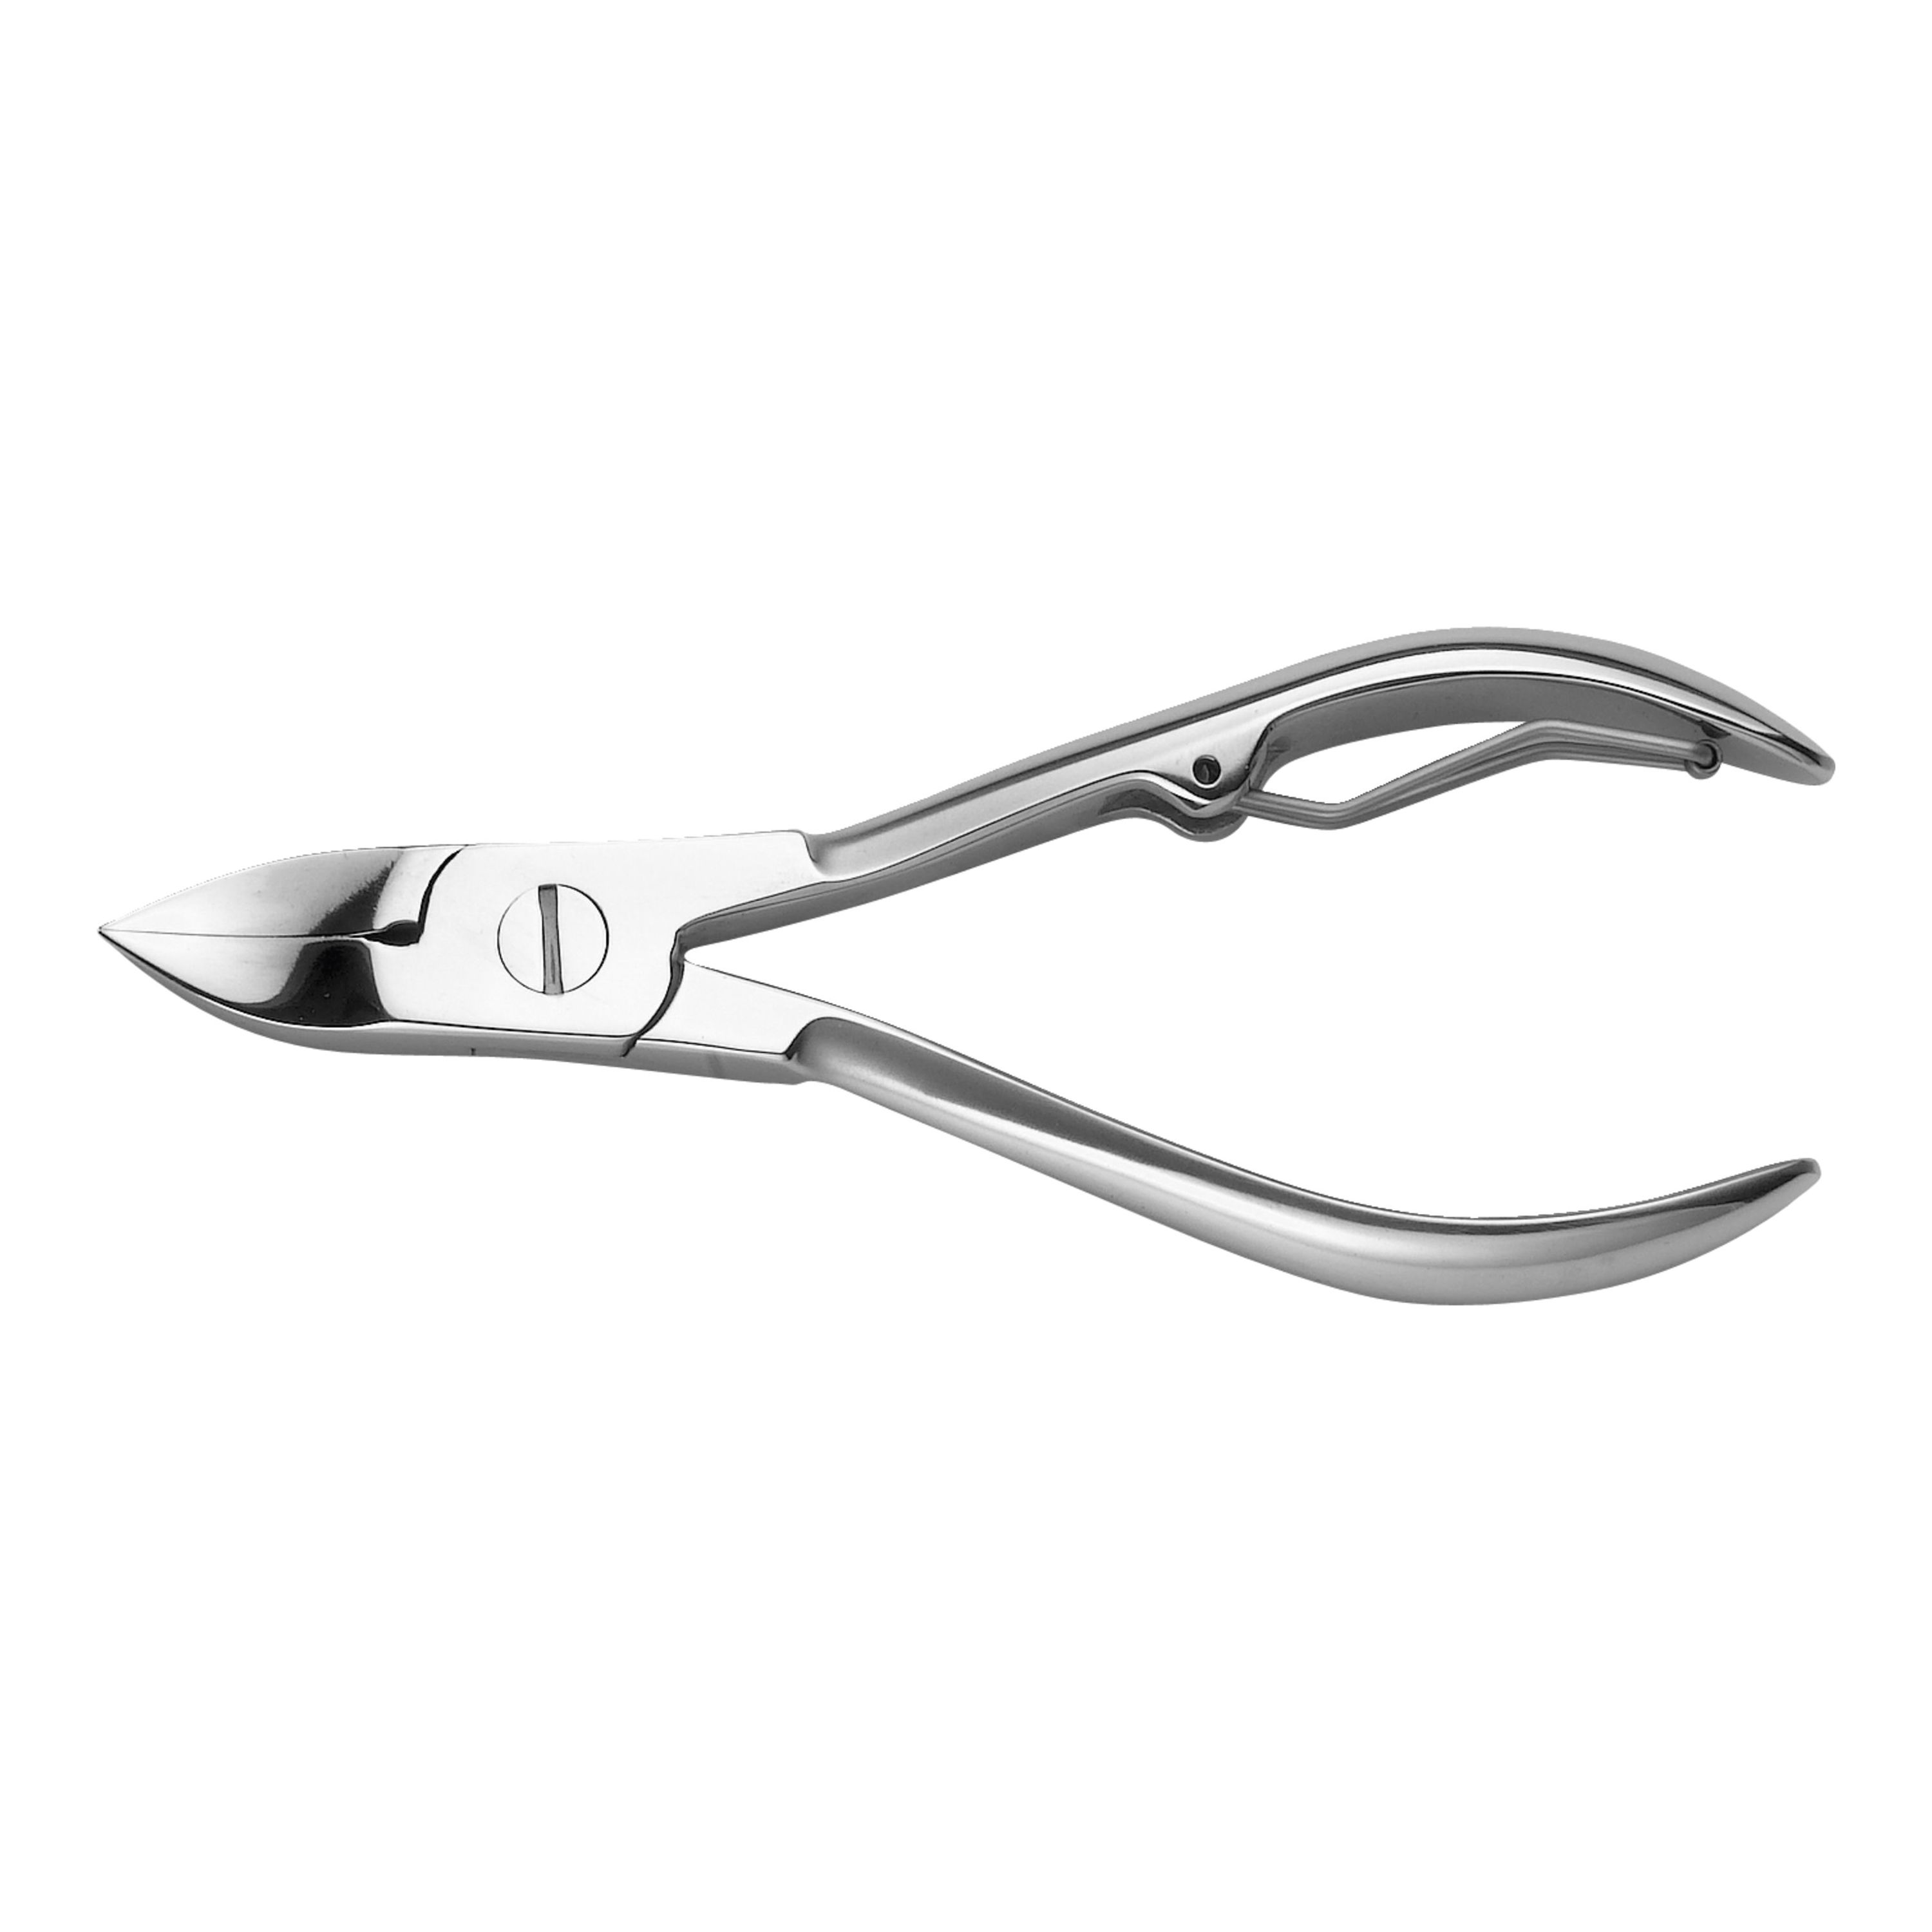 Zwilling J.A. Henckels Nail clippers, ref: 42422-001